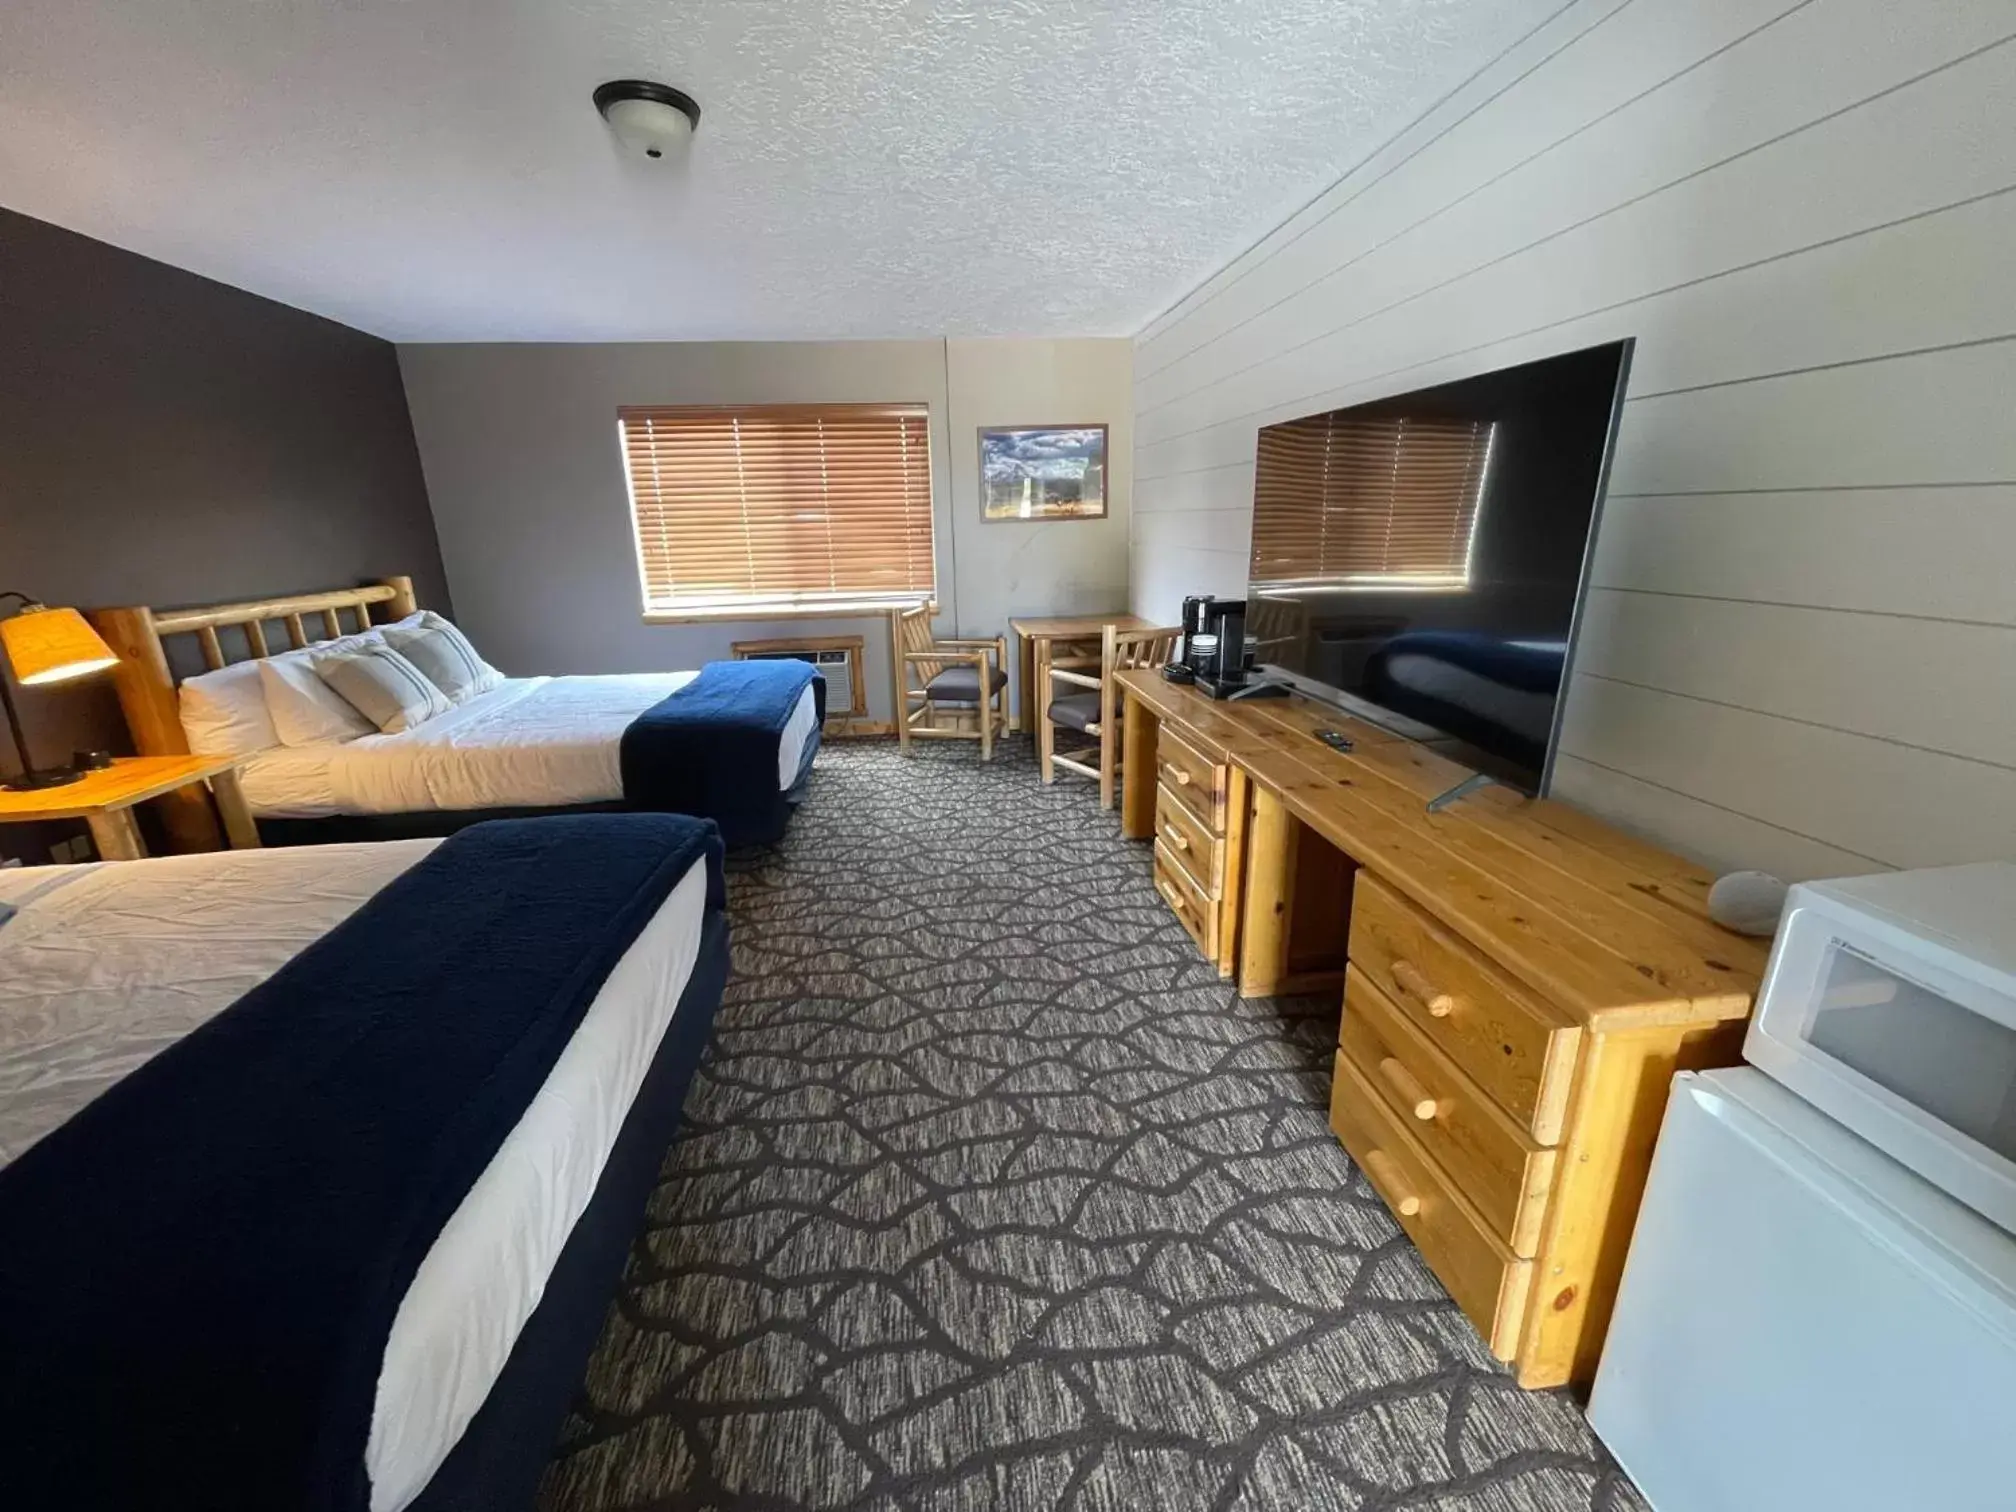 Double Room with Mountain View in Teton Peaks Resort